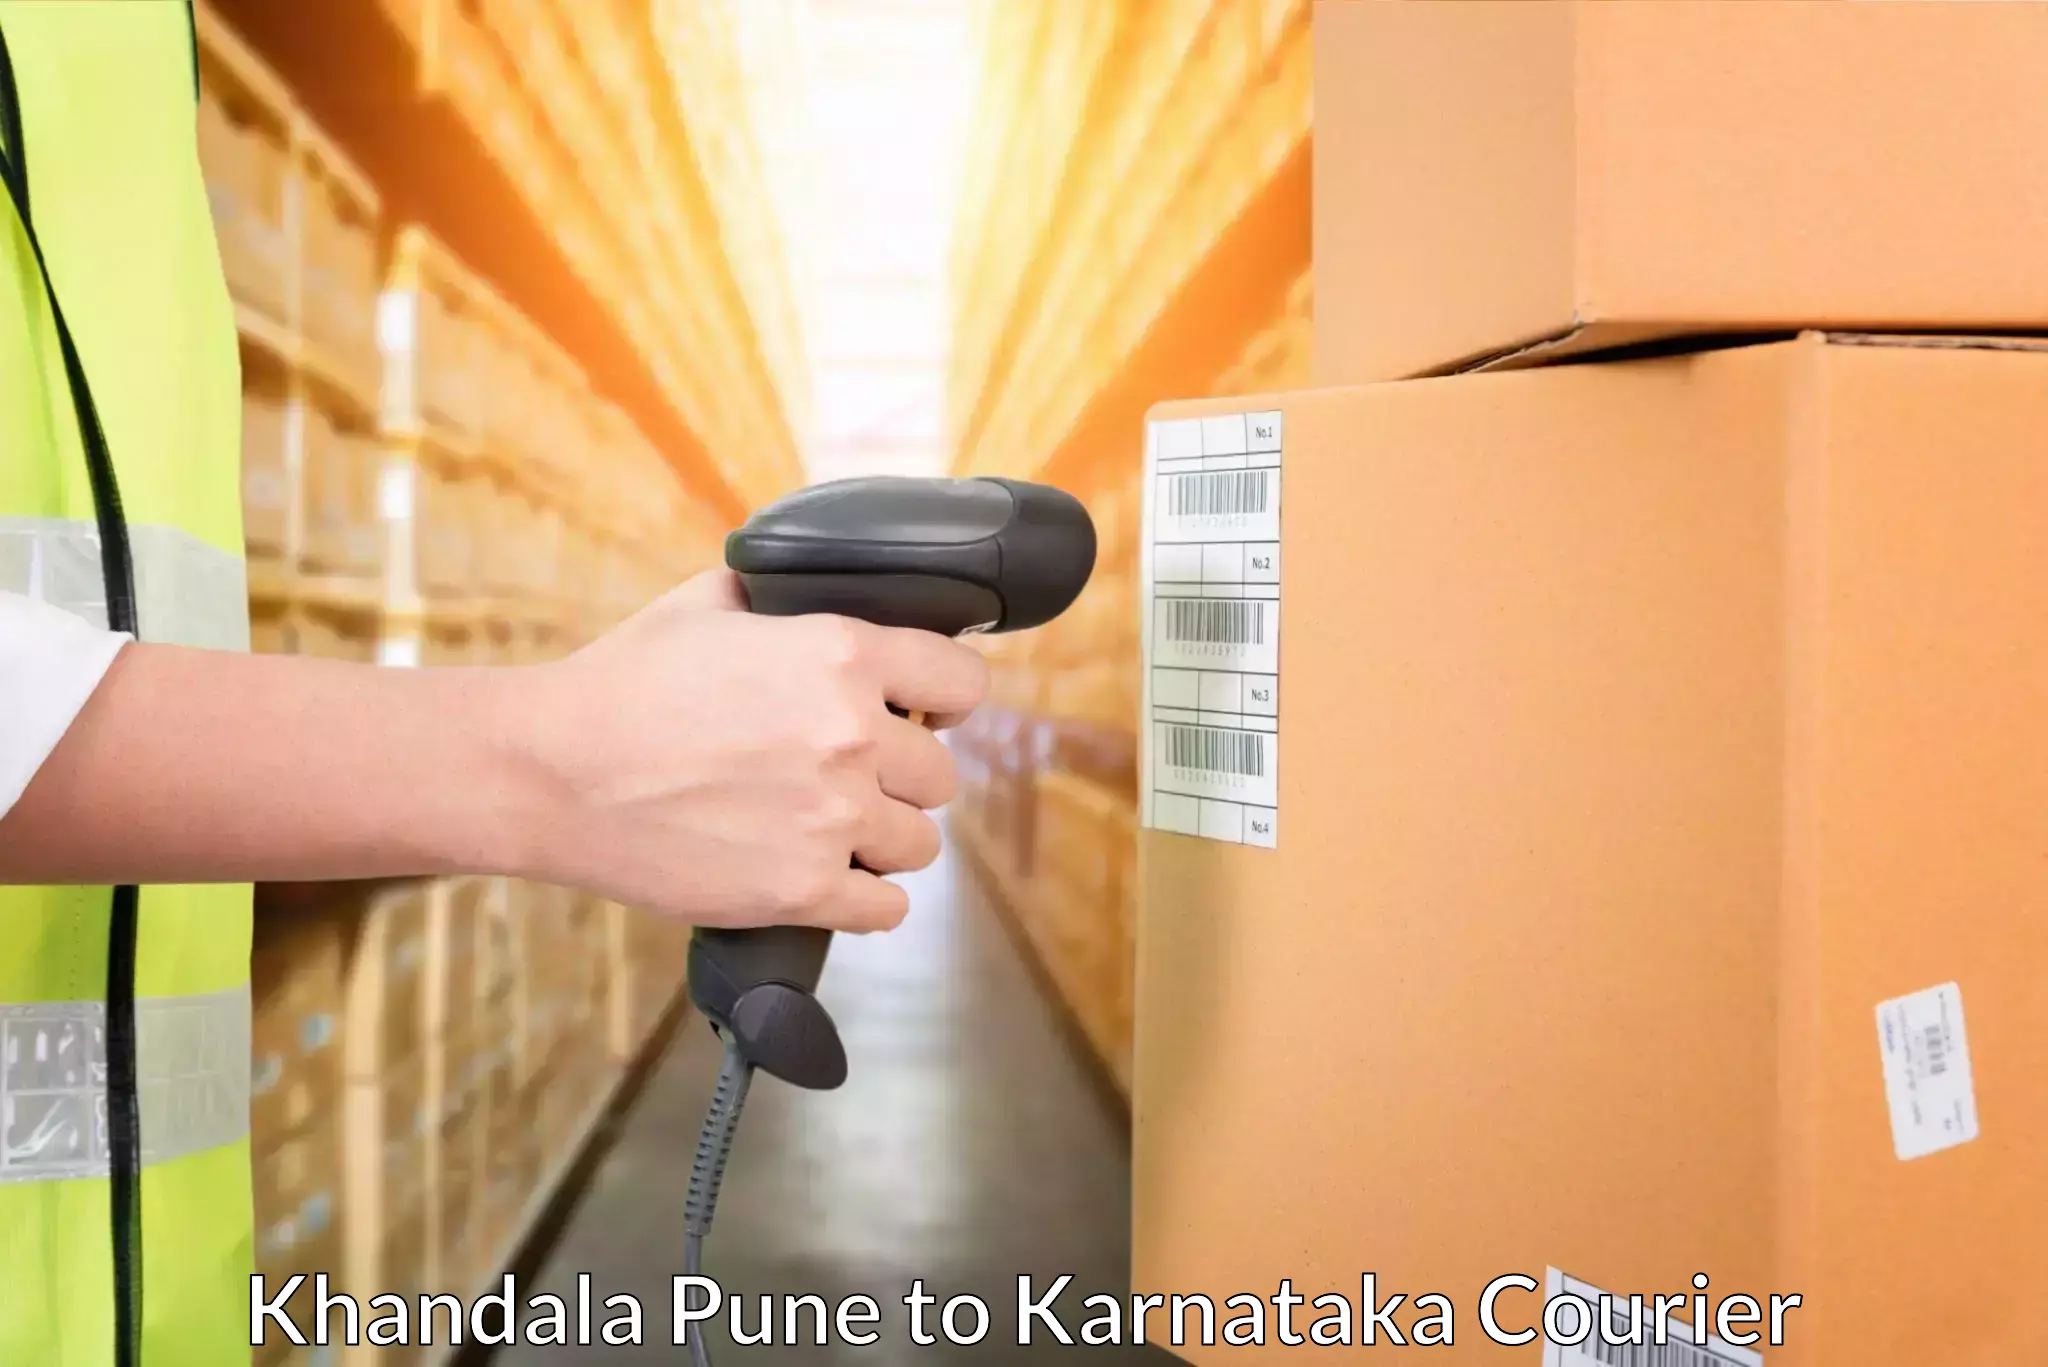 User-friendly delivery service Khandala Pune to Bantwal